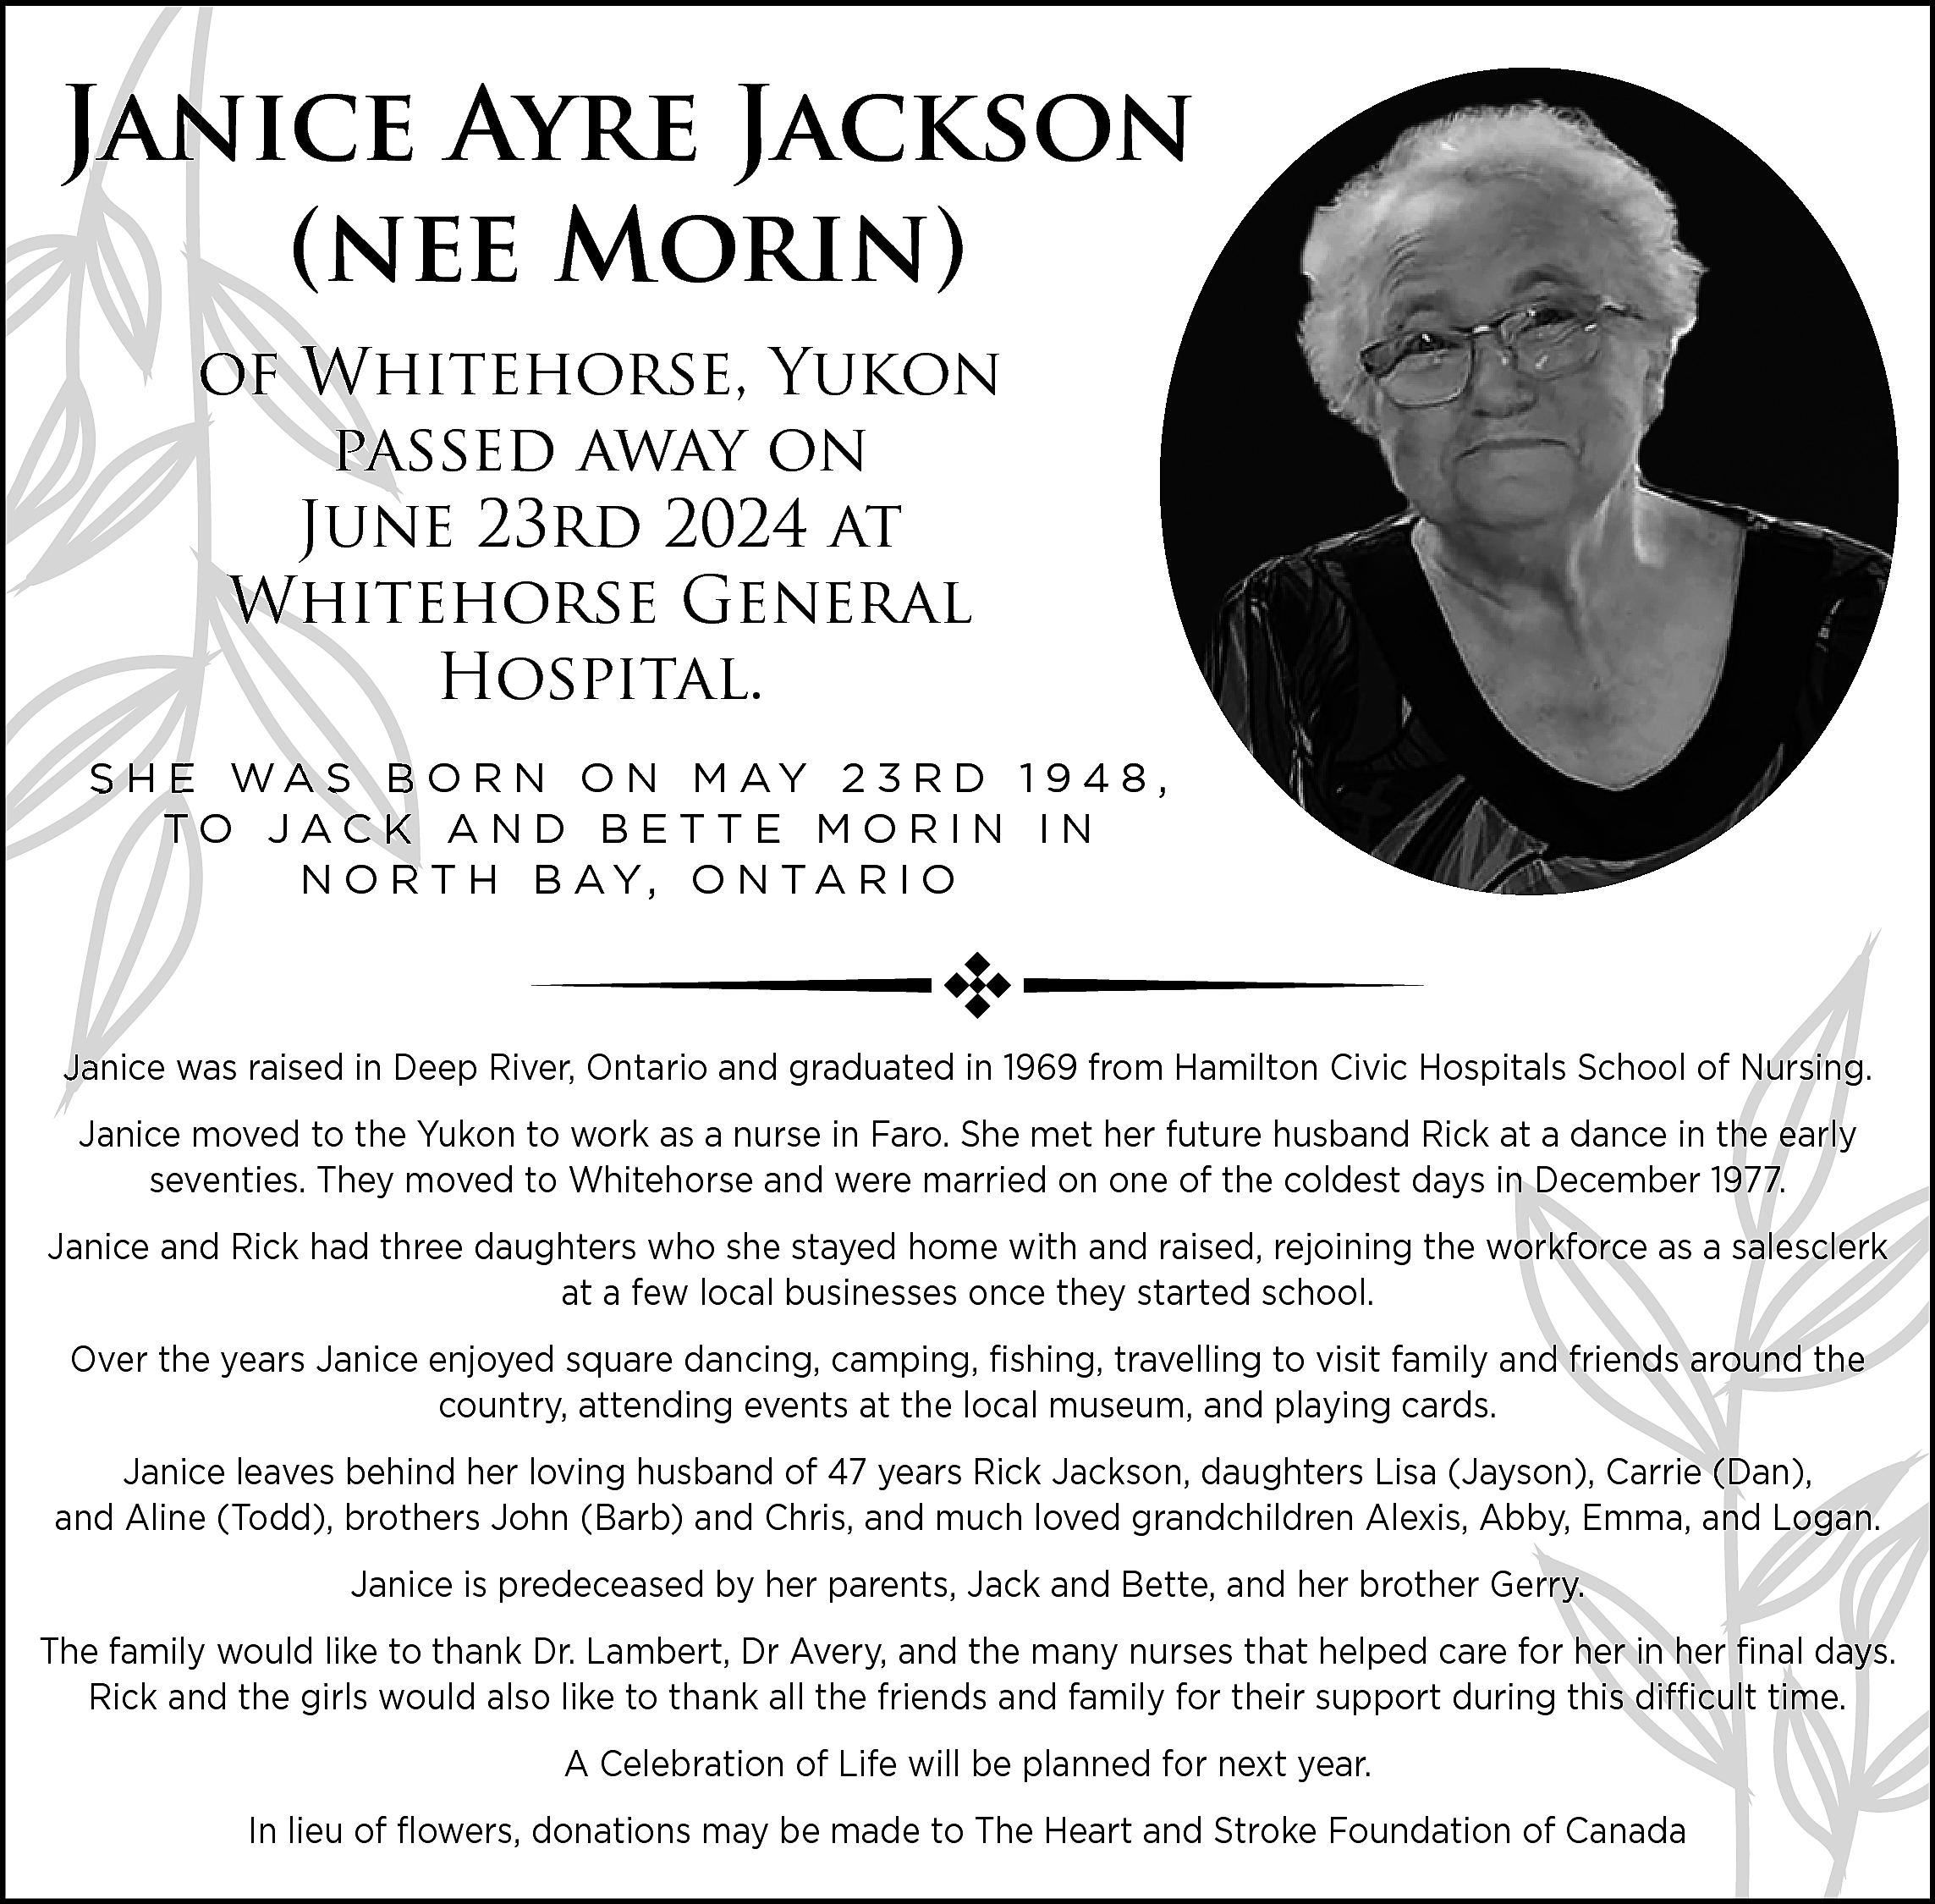 Janice <br>Ayre Jackson <br>Jani <br>(nee  Janice  Ayre Jackson  Jani  (nee Morin)  of Wh  Whitehorse, Yukon  passed  away on  pa  June 23rd 2024 at  Whitehorse  General  Wh  Hospital.  S H E WA S B O R N O N M AY 2 3 R D 1 9 4 8 ,  TO JACK AND BETTE MORIN IN  N O R T H B AY, O N T A R I O    Janice was raised in Deep River, Ontario and graduated in 1969 from Hamilton Civic Hospitals School of Nursing.  Janic  Janice moved to the Yukon to work as a nurse in Faro. She met her future husband Rick at a dance in the early  seventies. They moved to Whitehorse and were married on one of the coldest days in December 1977.  Janice and Rick had three daughters who she stayed home with and raised, rejoining the workforce as a salesclerk  at a few local businesses once they started school.  Over the years Janice enjoyed square dancing, camping, fishing, travelling to visit family and friends around the  country, attending events at the local museum, and playing cards.  Janice leaves behind her loving husband of 47 years Rick Jackson, daughters Lisa (Jayson), Carrie (Dan),  and Aline (Todd), brothers John (Barb) and Chris, and much loved grandchildren Alexis, Abby, Emma, and Logan.  Janice is predeceased by her parents, Jack and Bette, and her brother Gerry.  The family would like to thank Dr. Lambert, Dr Avery, and the many nurses that helped care for her in her final days.  Rick and the girls would also like to thank all the friends and family for their support during this difficult time.  A Celebration of Life will be planned for next year.  In lieu of flowers, donations may be made to The Heart and Stroke Foundation of Canada    